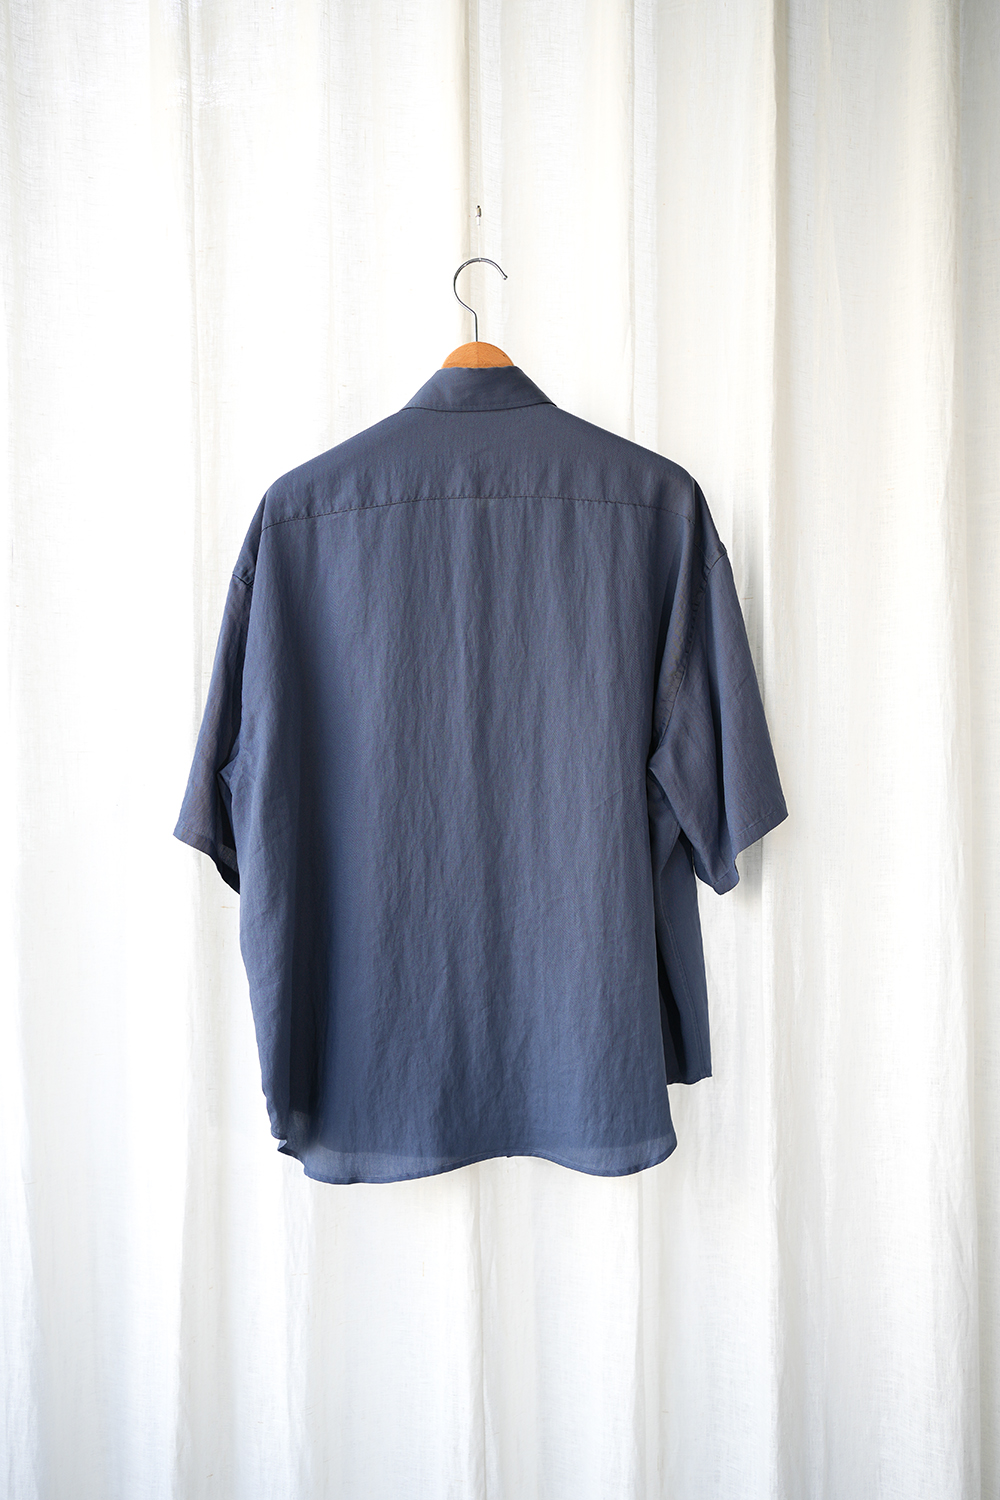 POIRELE TWILL H/S SH | ANOTHER LOUNGE